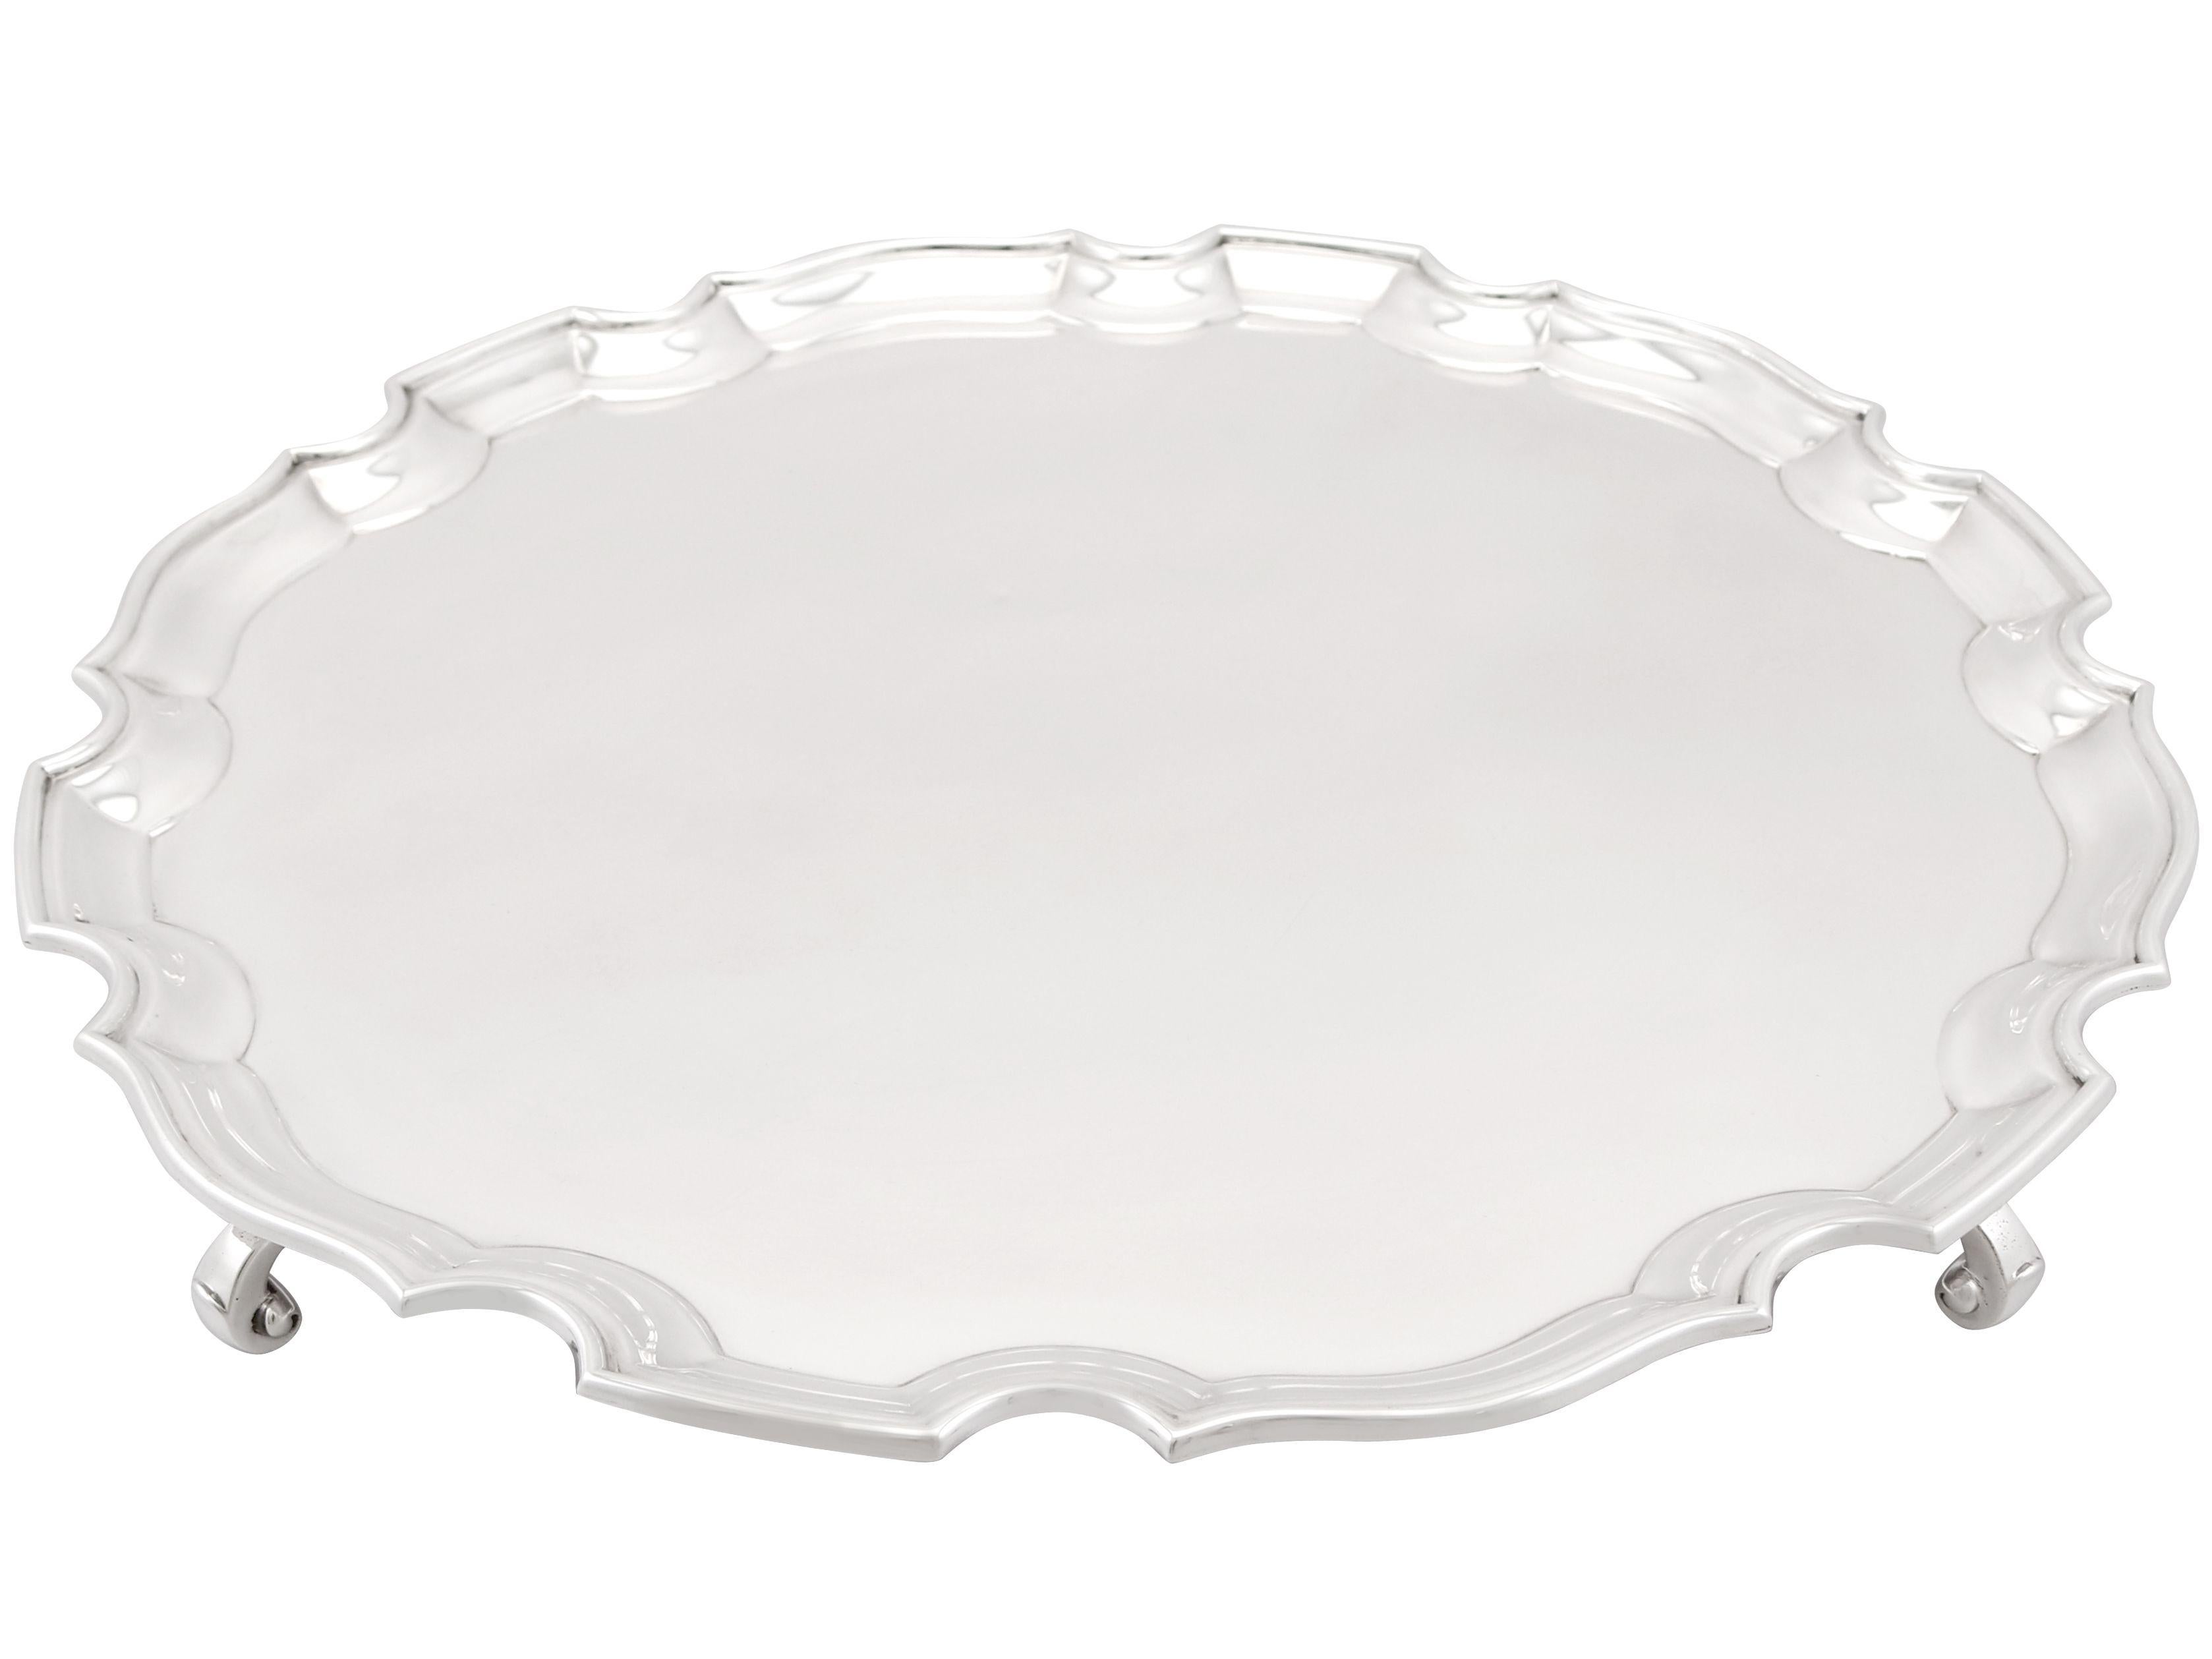 An exceptional, fine and impressive, large antique George V English sterling silver salver; an addition to our silver dining collection

This exceptional antique George V sterling silver salver has a circular shaped form.

The surface of this